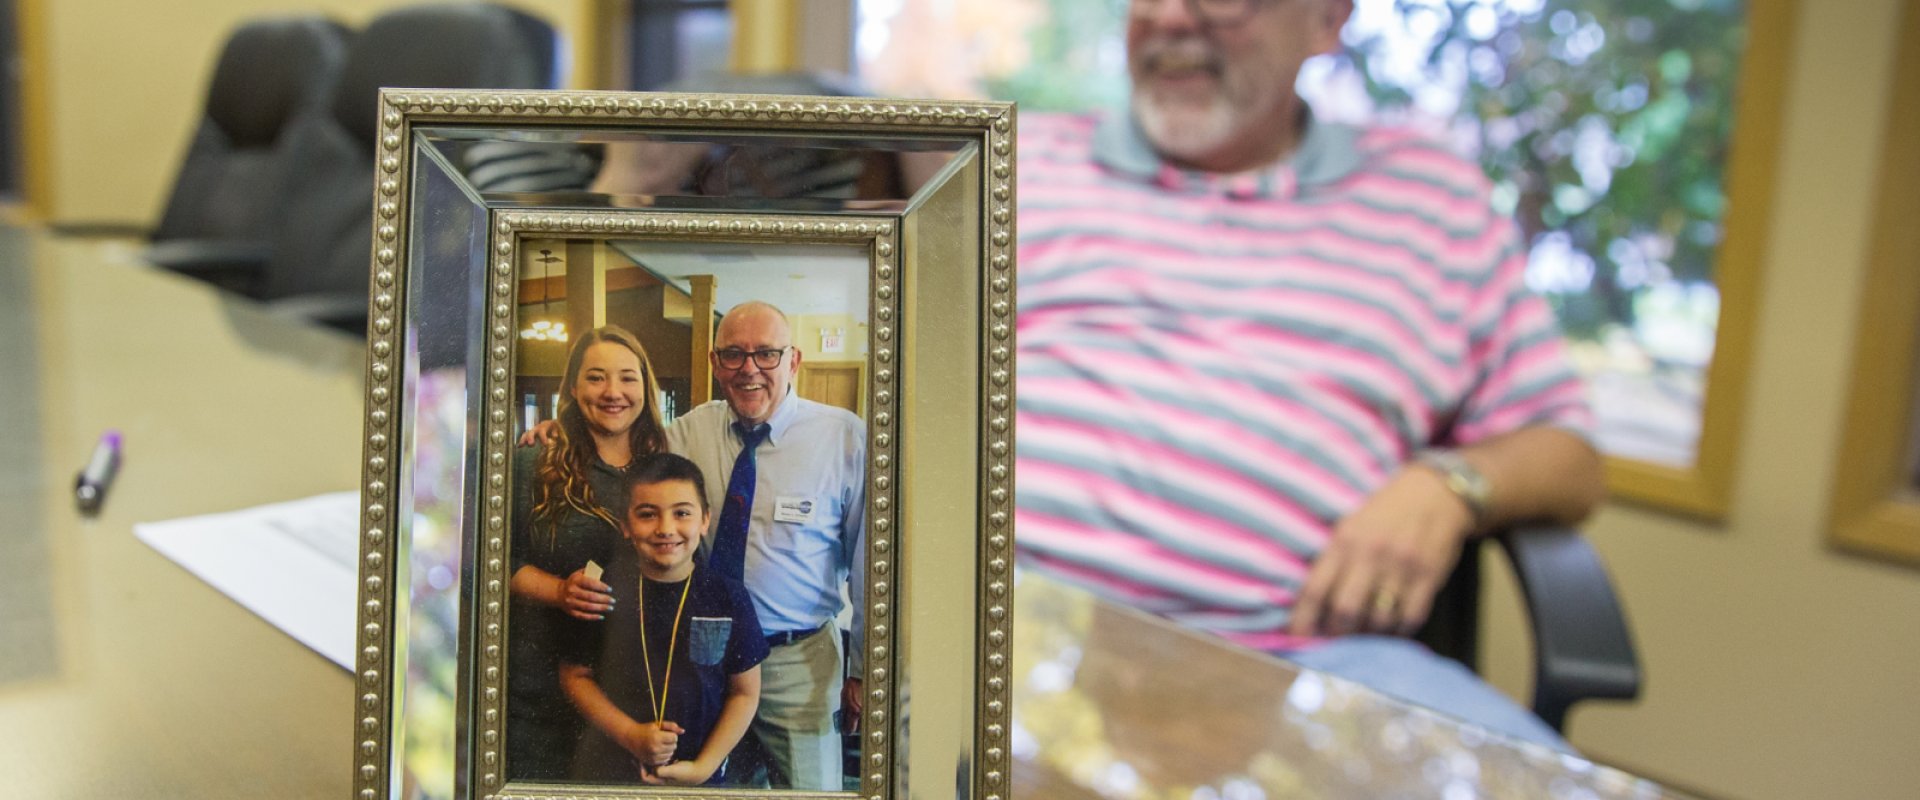 A man, blurred in the background, sits behind a photo of himself and his family